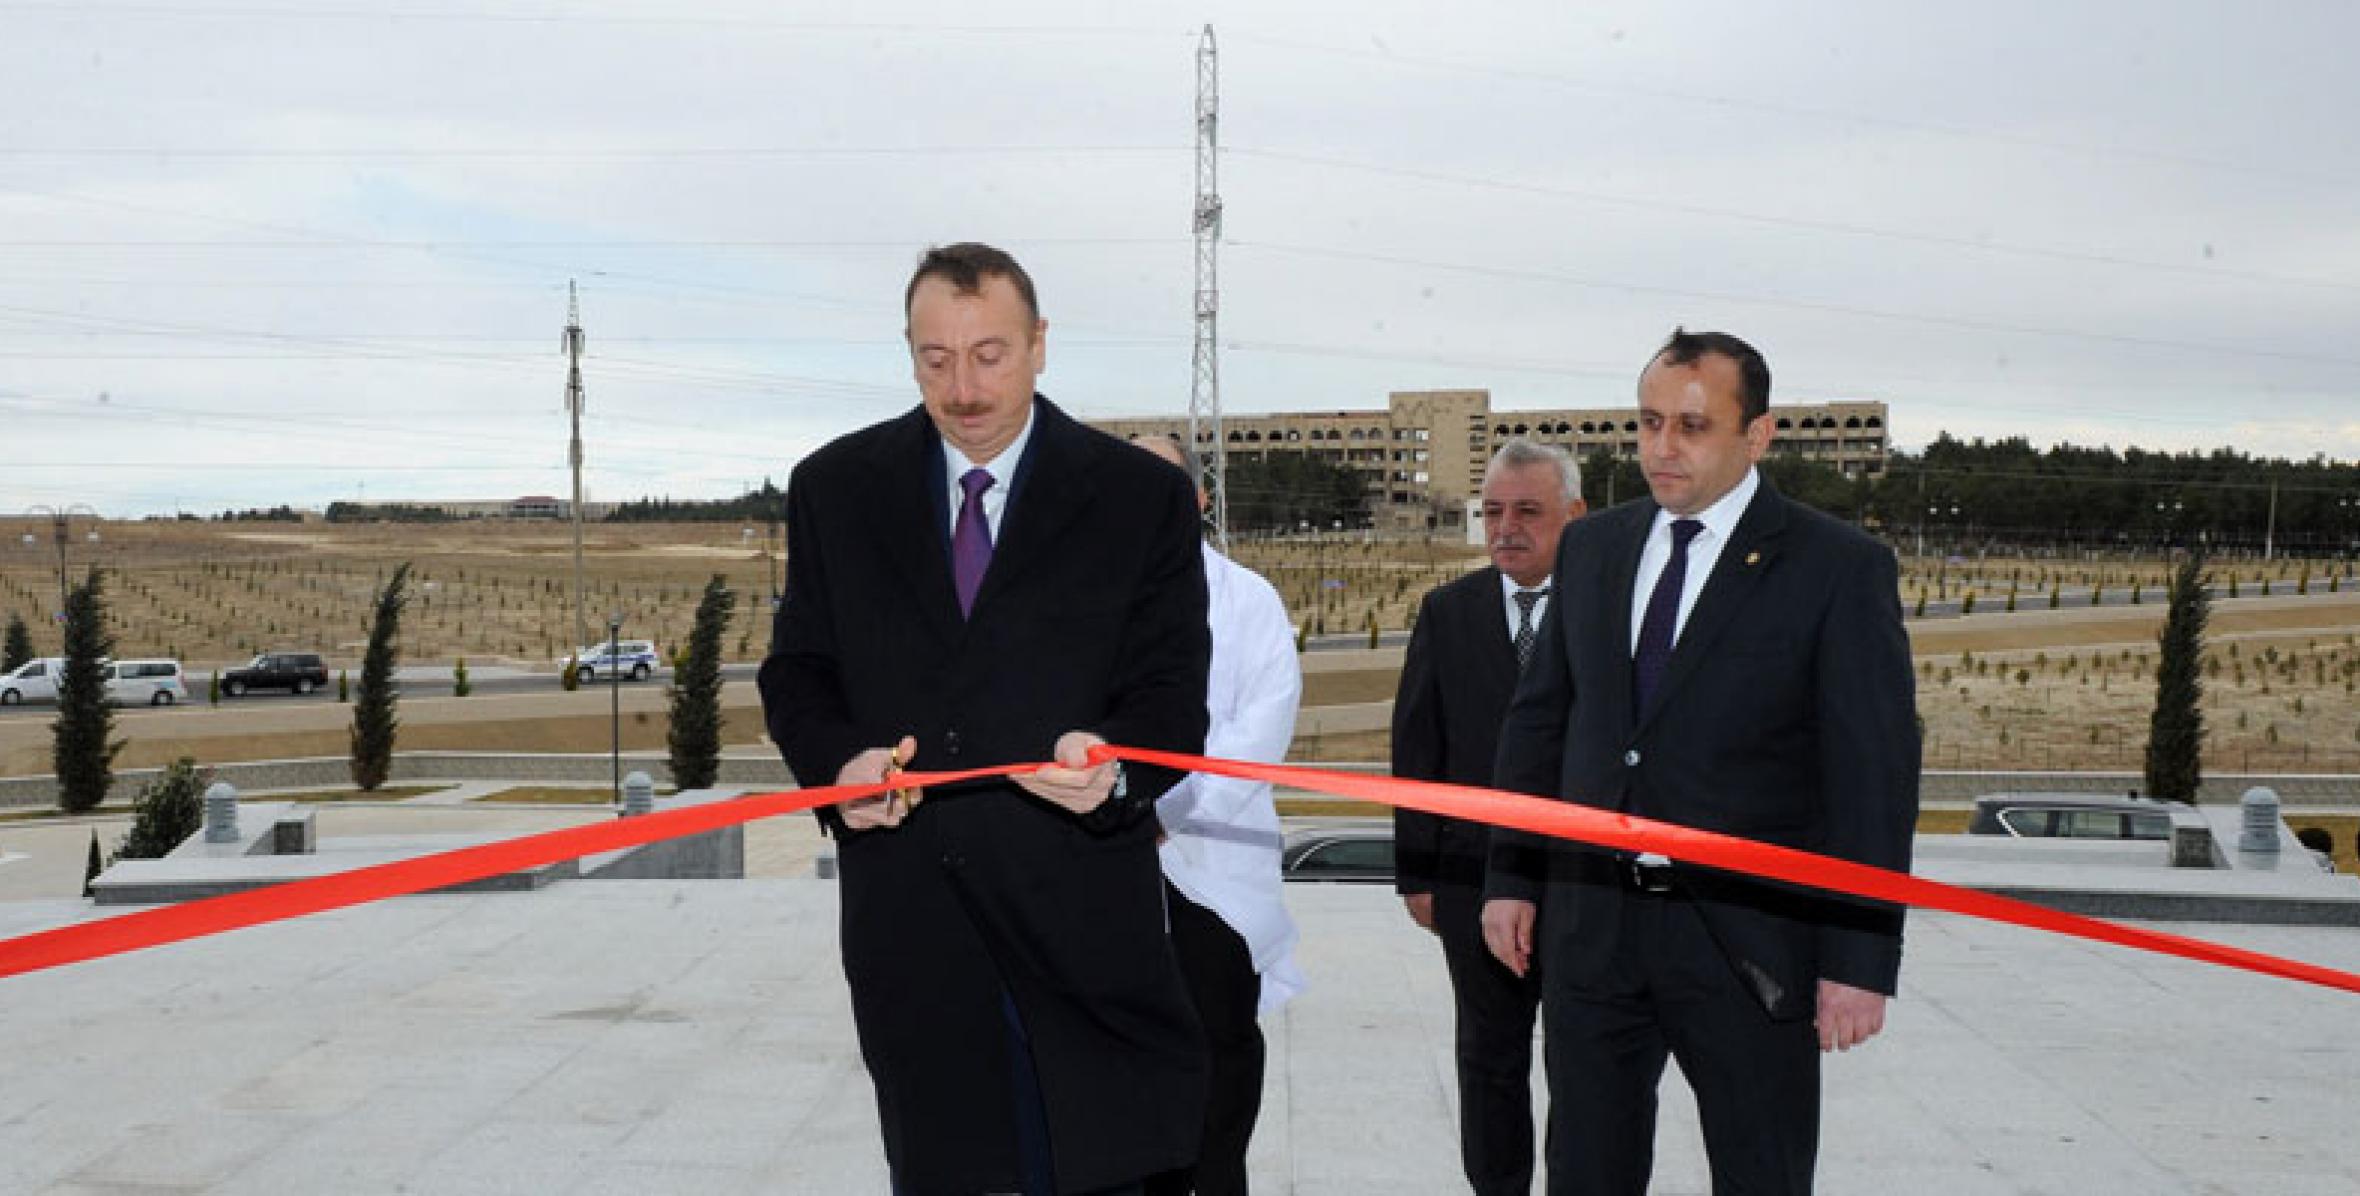 Ilham Aliyev participated at the opening of Gashalty resort site in Naftalan